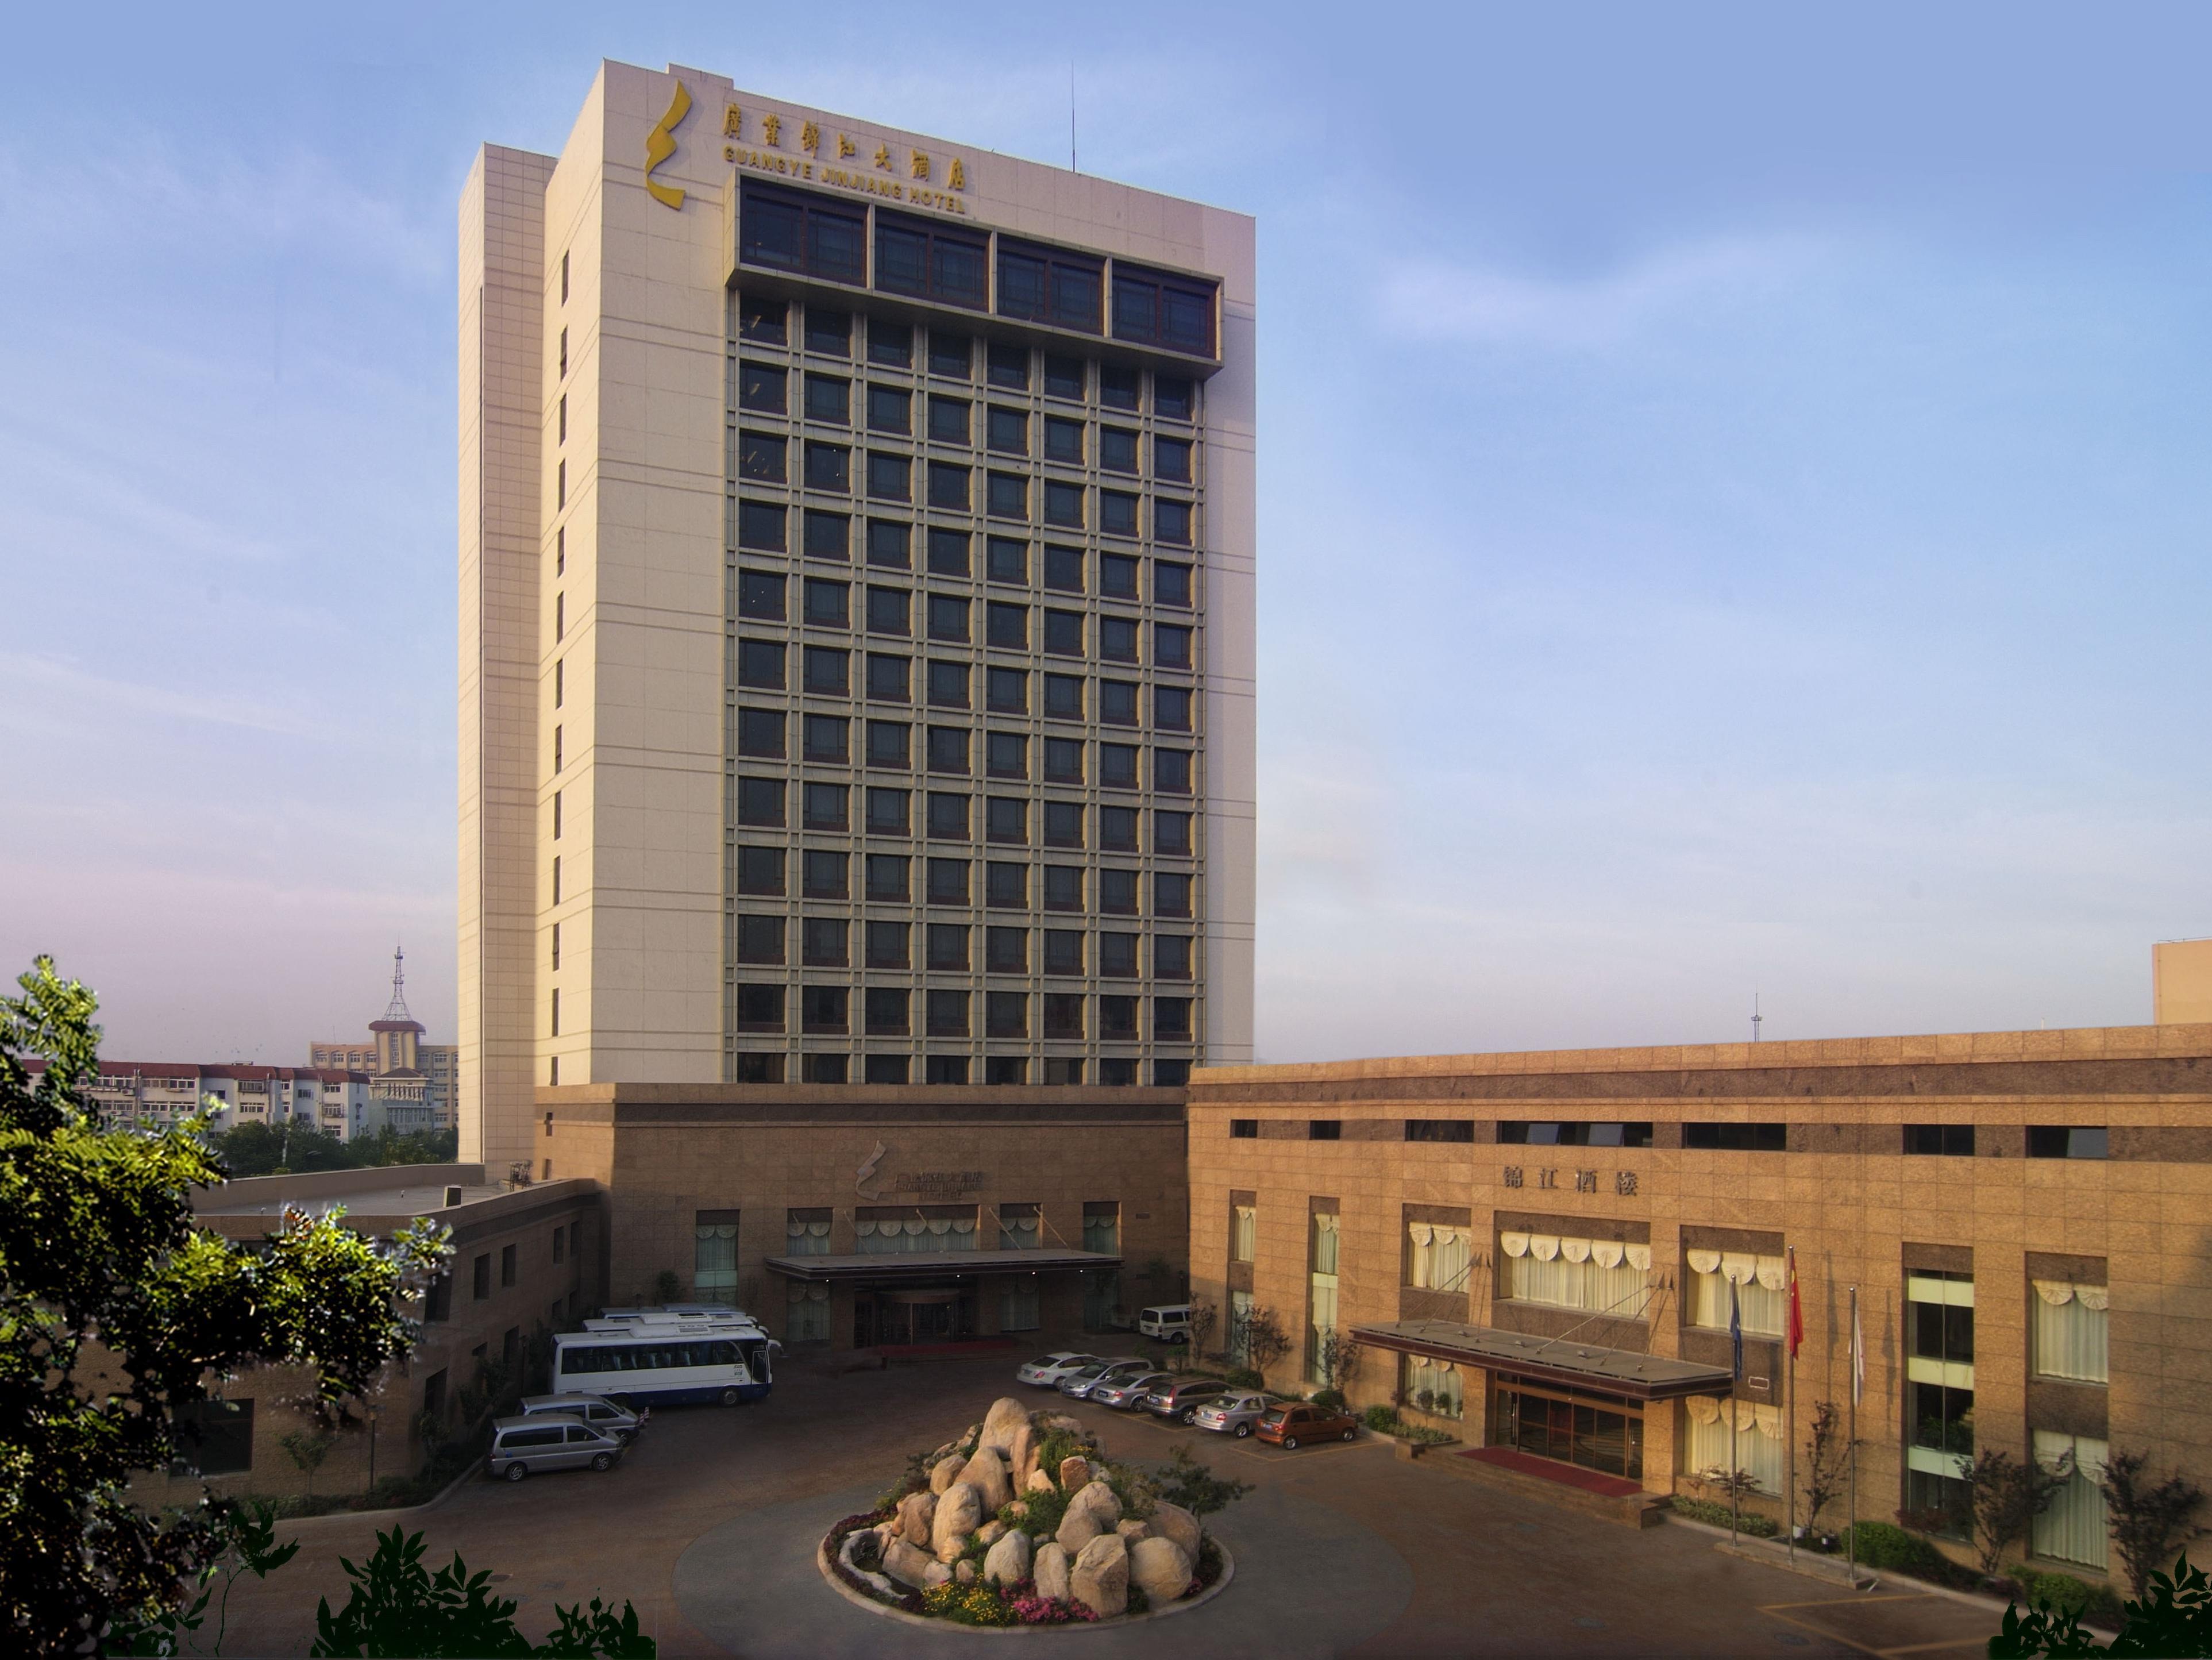 Guangye Jinjiang Hotel Qingdao FAQ 2016, What facilities are there in Guangye Jinjiang Hotel Qingdao 2016, What Languages Spoken are Supported in Guangye Jinjiang Hotel Qingdao 2016, Which payment cards are accepted in Guangye Jinjiang Hotel Qingdao , Qingdao Guangye Jinjiang Hotel room facilities and services Q&A 2016, Qingdao Guangye Jinjiang Hotel online booking services 2016, Qingdao Guangye Jinjiang Hotel address 2016, Qingdao Guangye Jinjiang Hotel telephone number 2016,Qingdao Guangye Jinjiang Hotel map 2016, Qingdao Guangye Jinjiang Hotel traffic guide 2016, how to go Qingdao Guangye Jinjiang Hotel, Qingdao Guangye Jinjiang Hotel booking online 2016, Qingdao Guangye Jinjiang Hotel room types 2016.